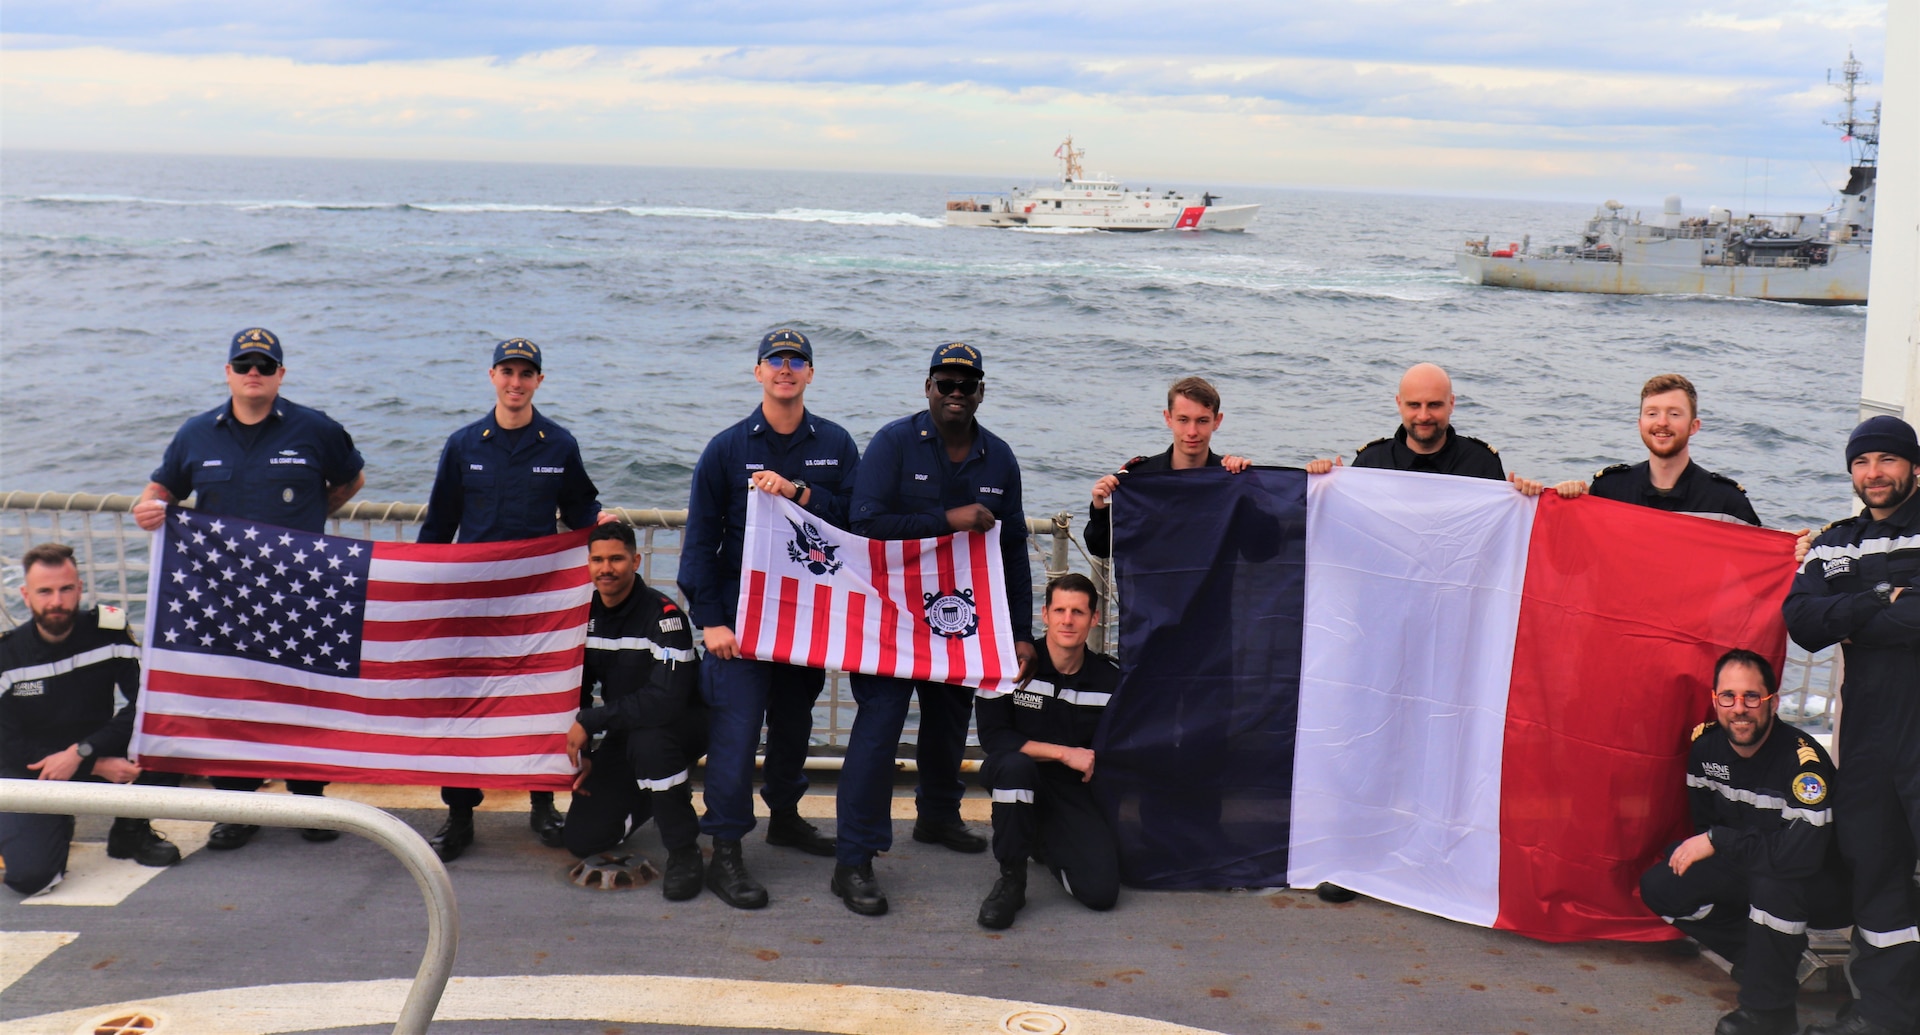 Crews from the Coast Guard Cutter Legare (WMEC 912) and the French naval ship Premier-Maître L’Her (F792) take a group photo aboard Legare, off the coast of Long Island, New York, on March 16, 2024. Legare worked with Premier-Maître L’Her for a series of engagements and exercises designed to demonstrate interoperability with a critical NATO partner